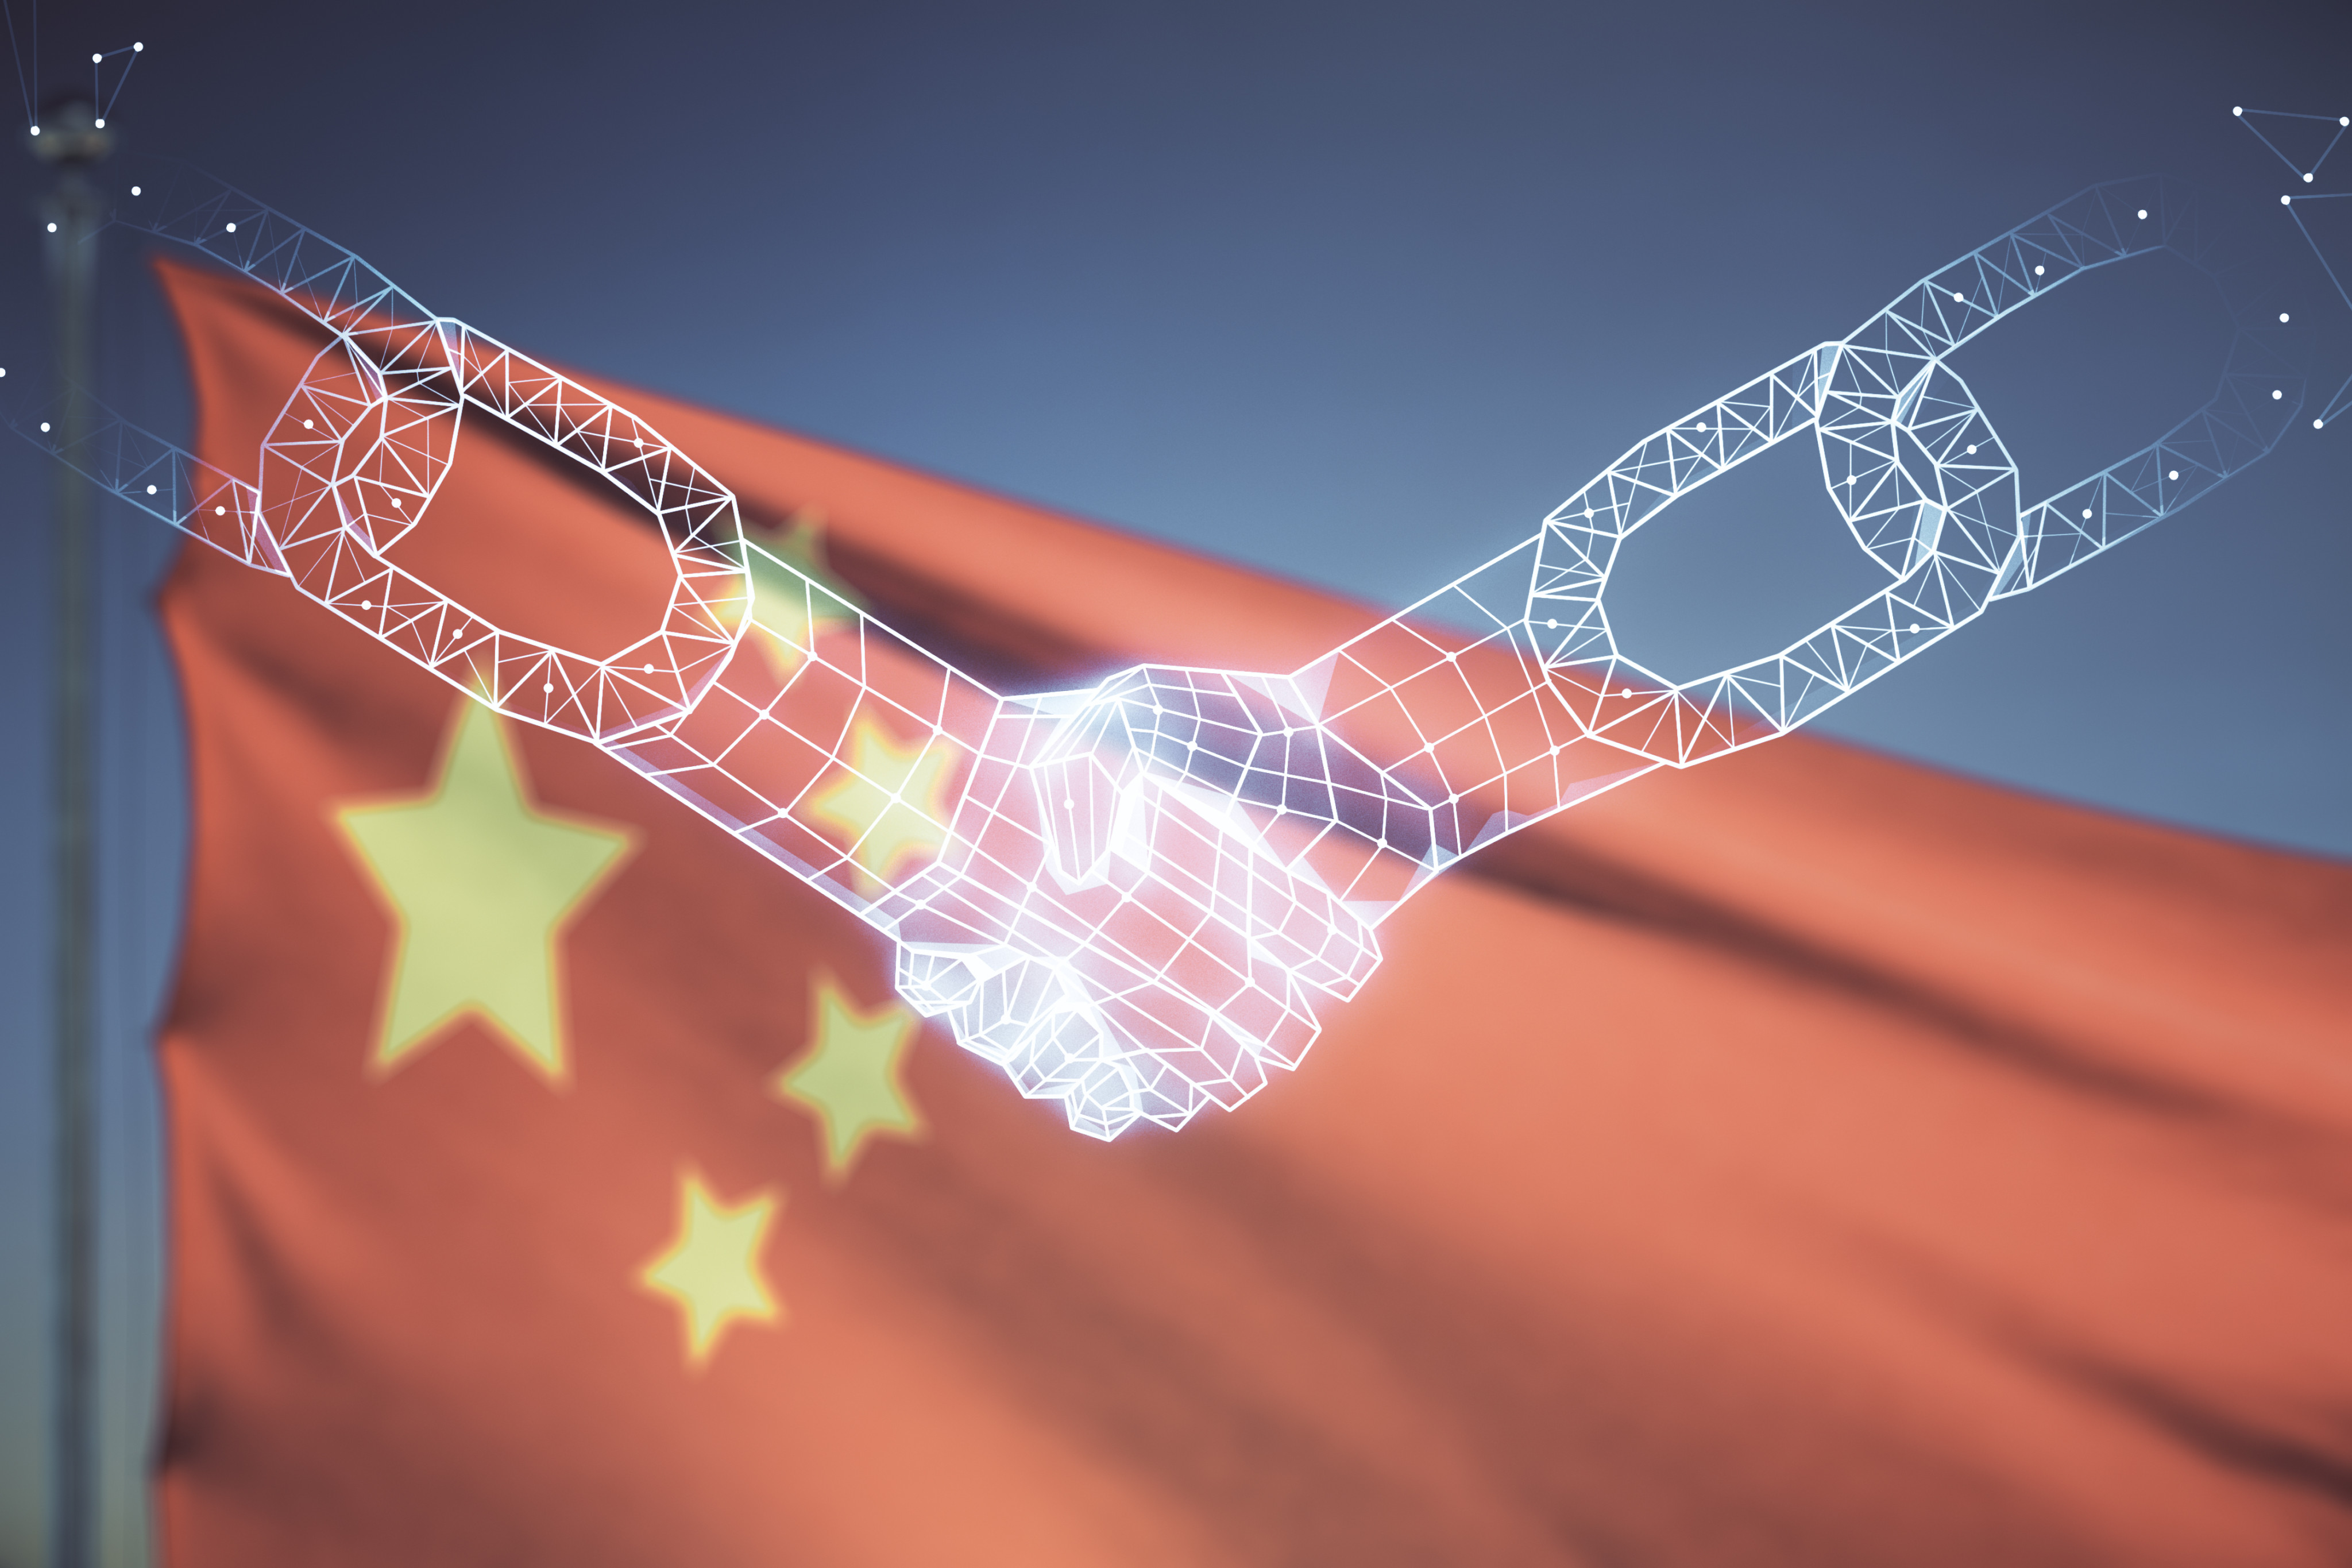 A new project in China uses real-name verification and public keys published on a blockchain to create a digital ID that citizens can use across platforms without revealing personal information. Photo: Shutterstock